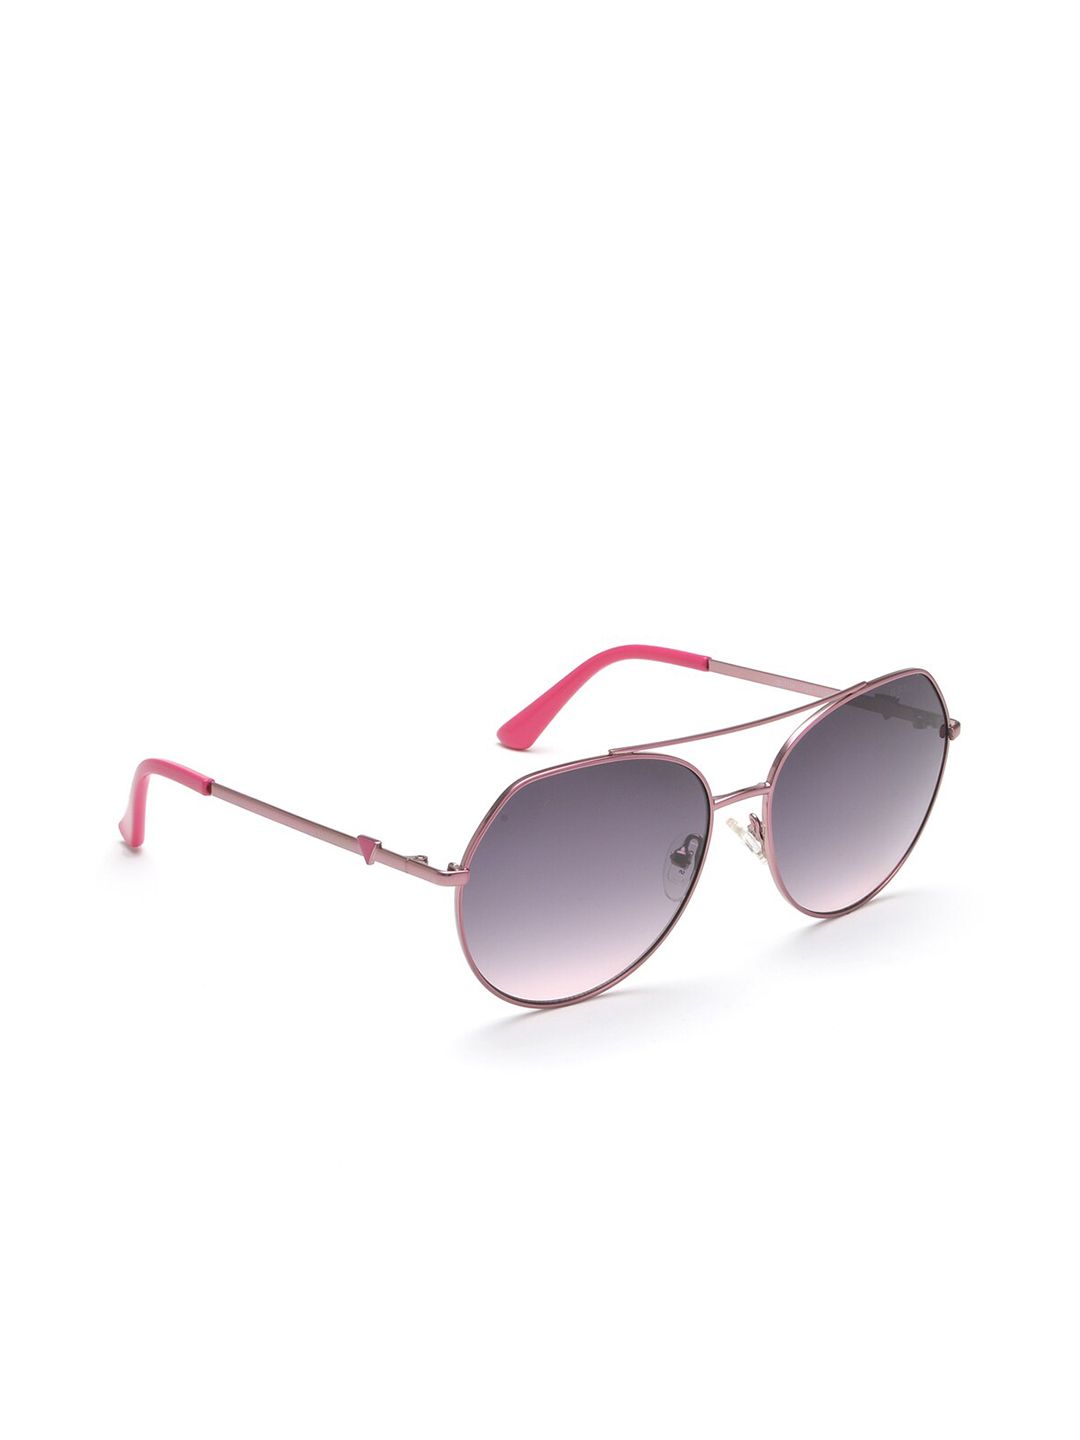 GUESS Women Purple Lens & Gold-Toned Aviator Sunglasses Price in India